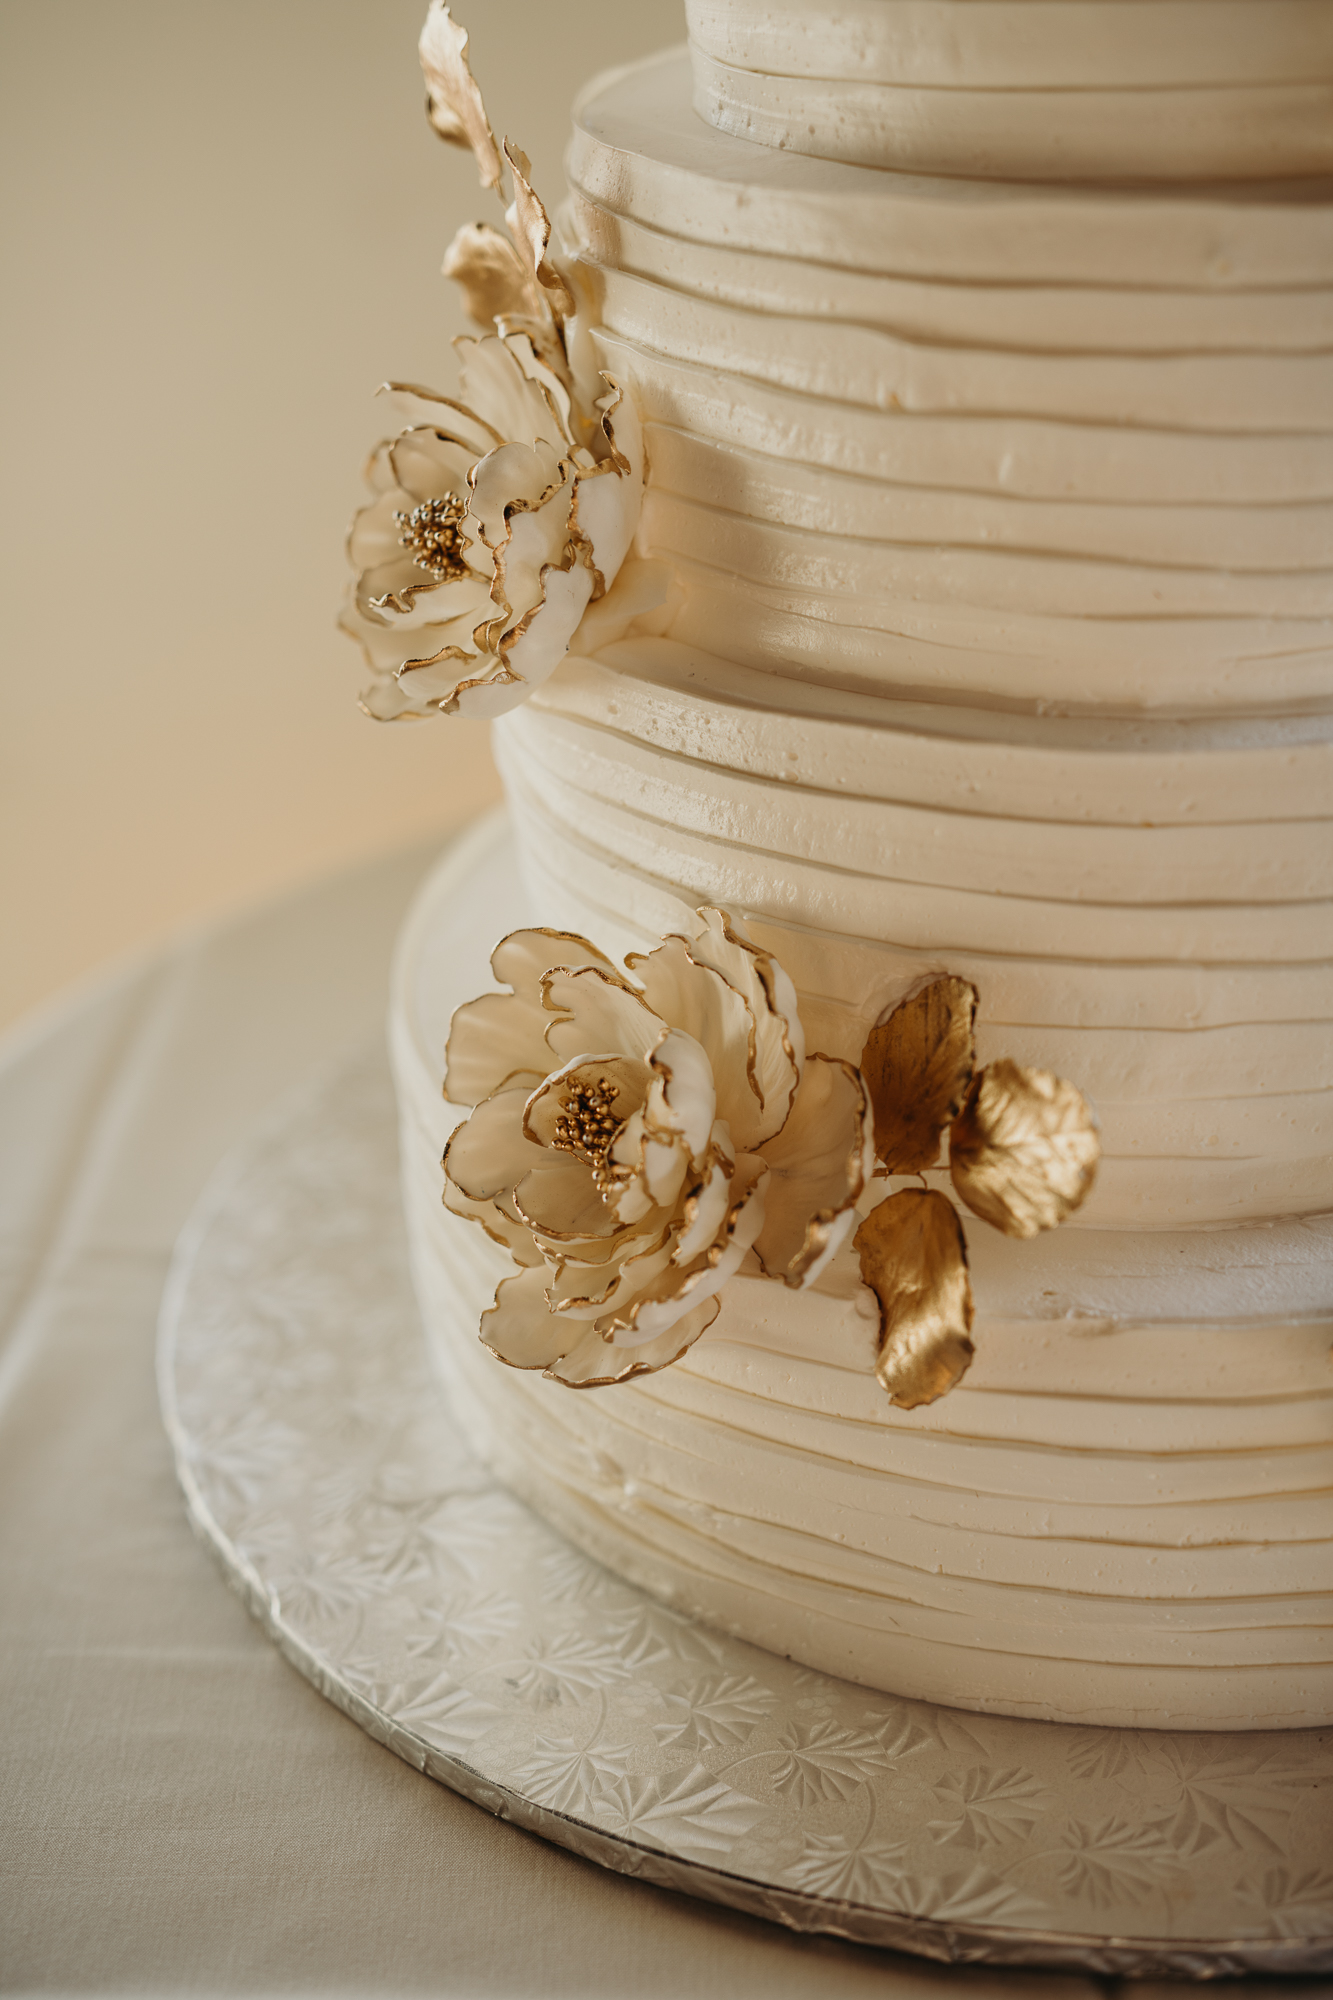 wedding cake details at liberty warehouse in brooklyn, new york city